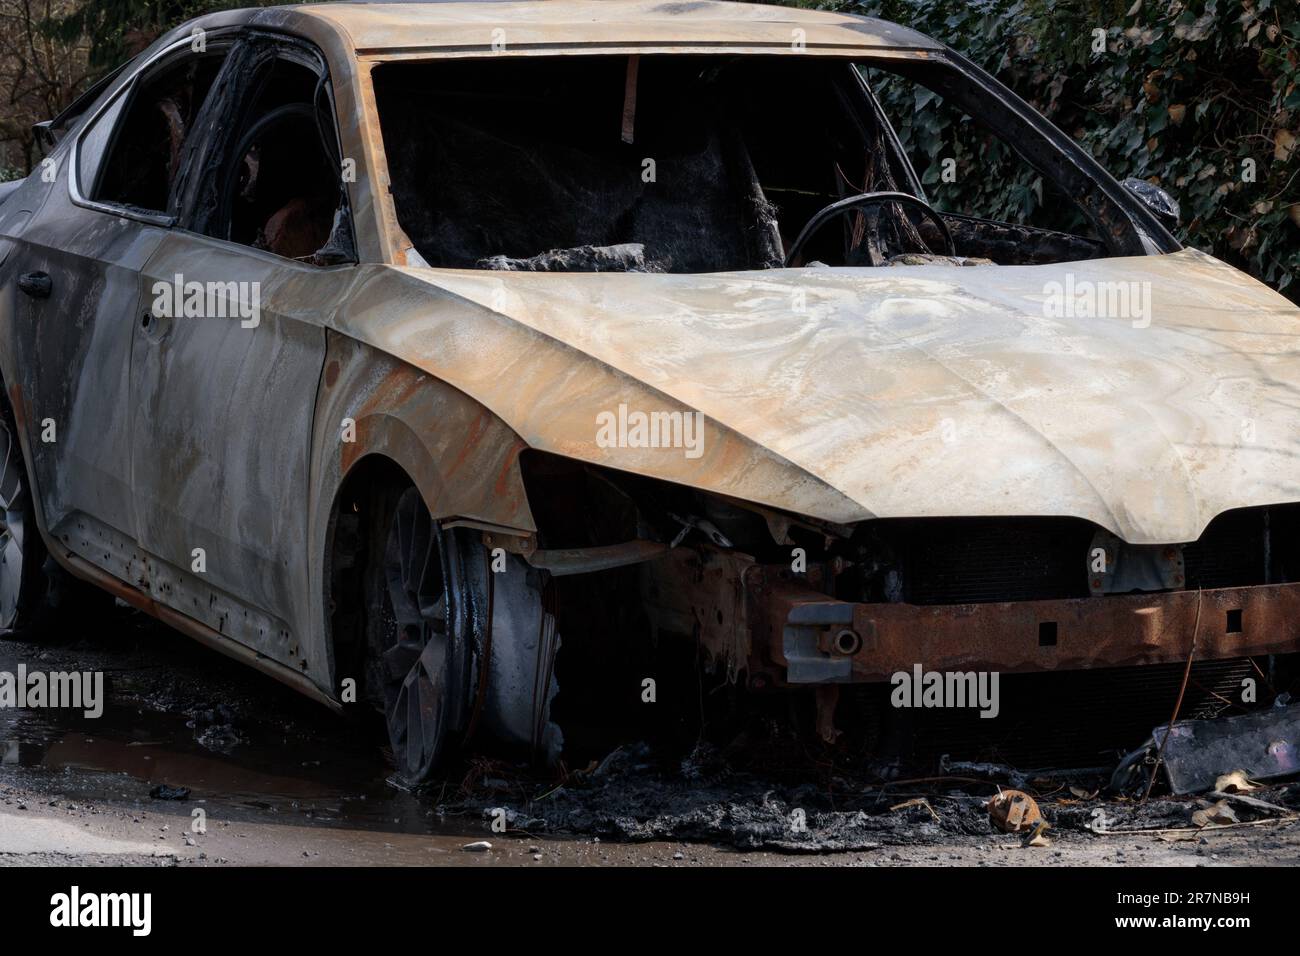 Auto completely burnt by arsonists. Burnt car wreckage, destroyed by arsonists. Vandalism Stock Photo